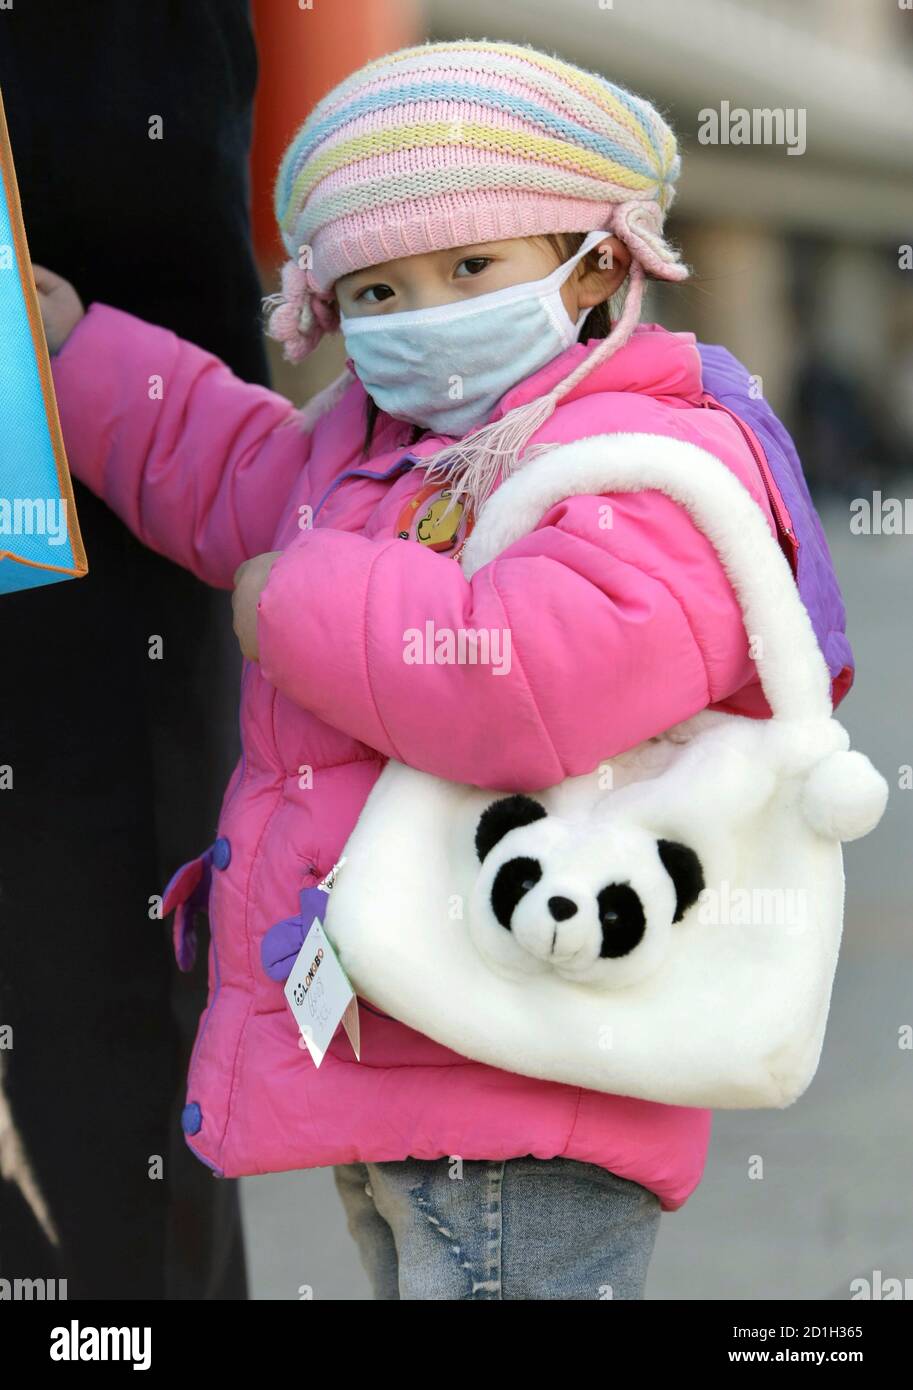 A child wearing a coat looks at the camera in Beijing December 4, 2008. A Siberian cold front swept China on Thursday, with temperatures in the capital plunging below freezing and thousands stranded on snowbound expressways in the remote far northwest. REUTERS/Jason Lee (CHINA) Stock Photo